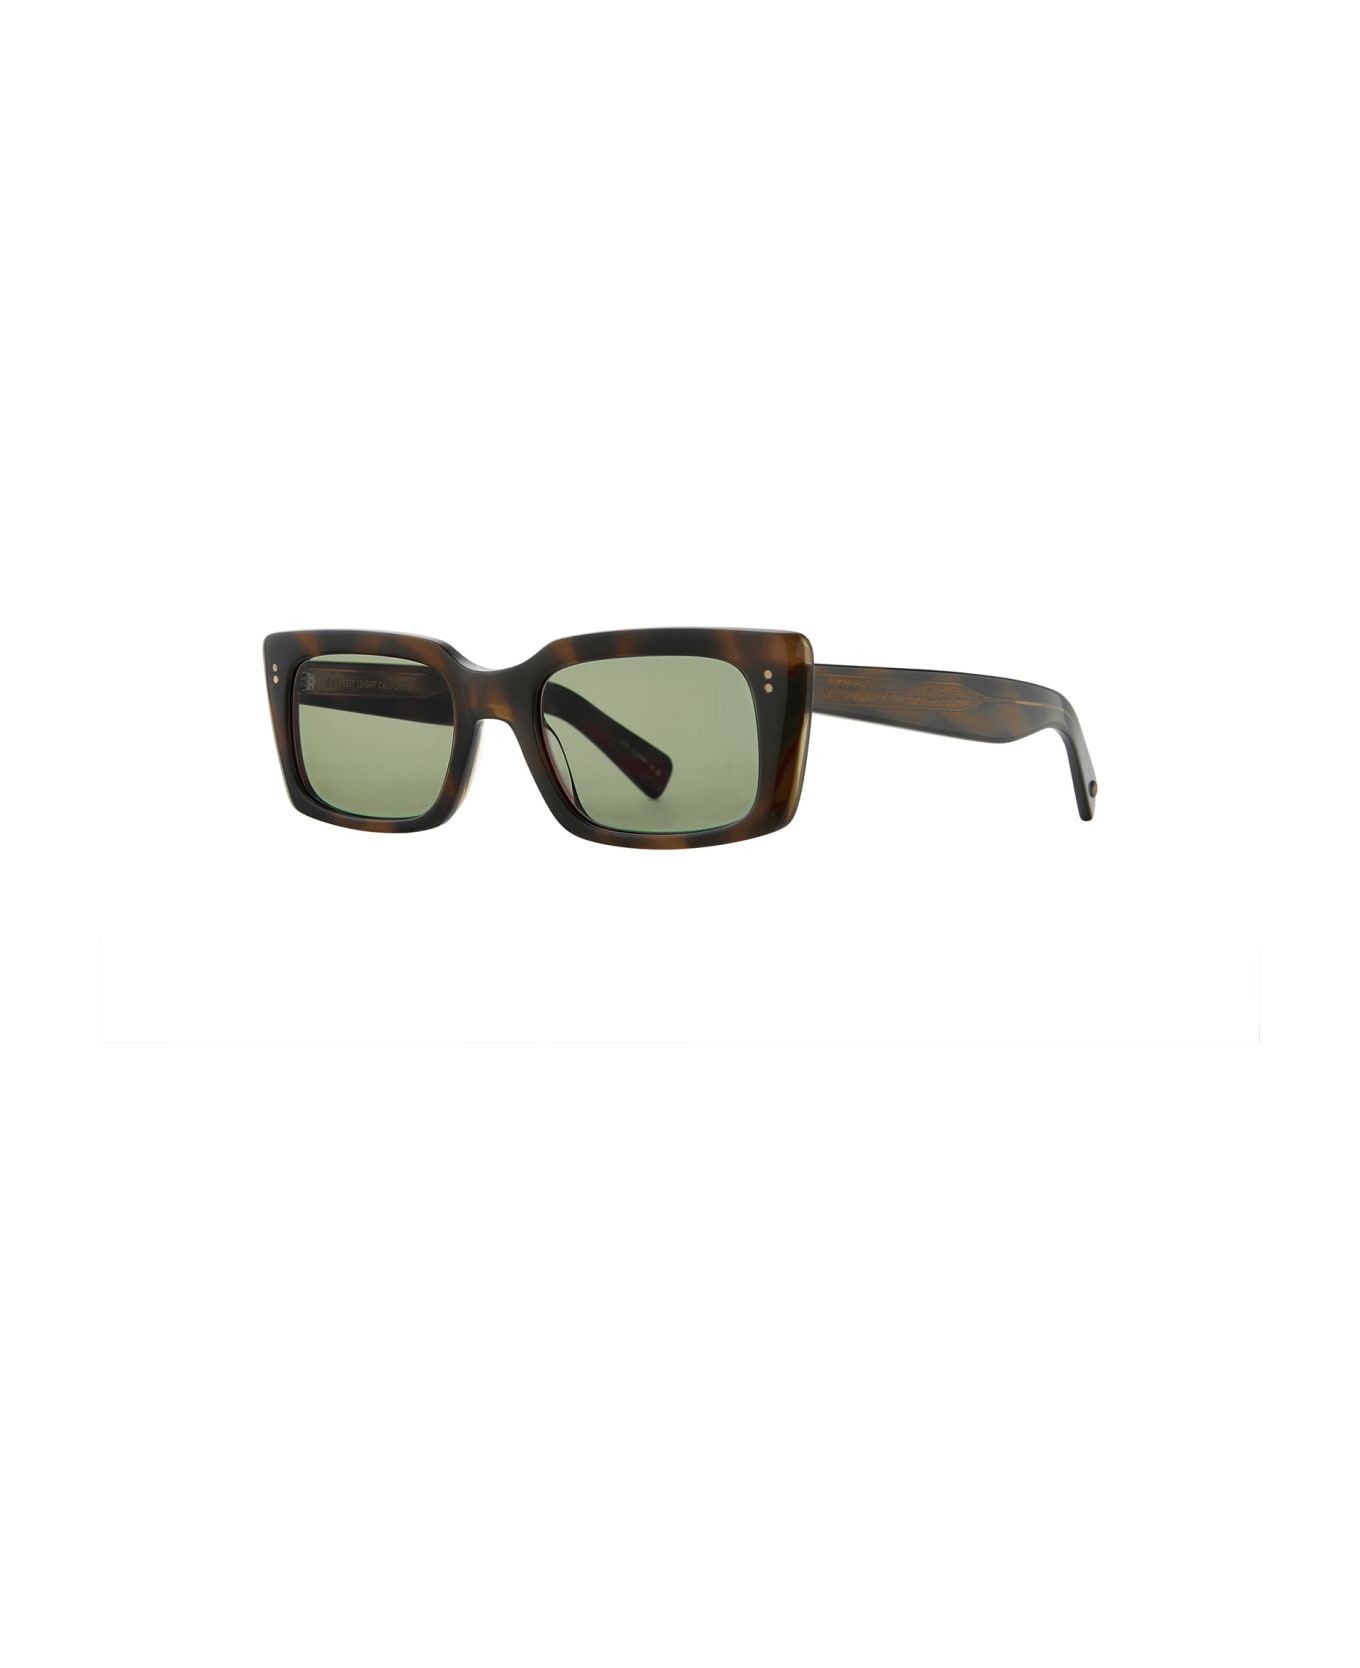 Garrett Leight Gl 3030 Sun Spotted Brown Shell Sunglasses - Spotted Brown Shell サングラス